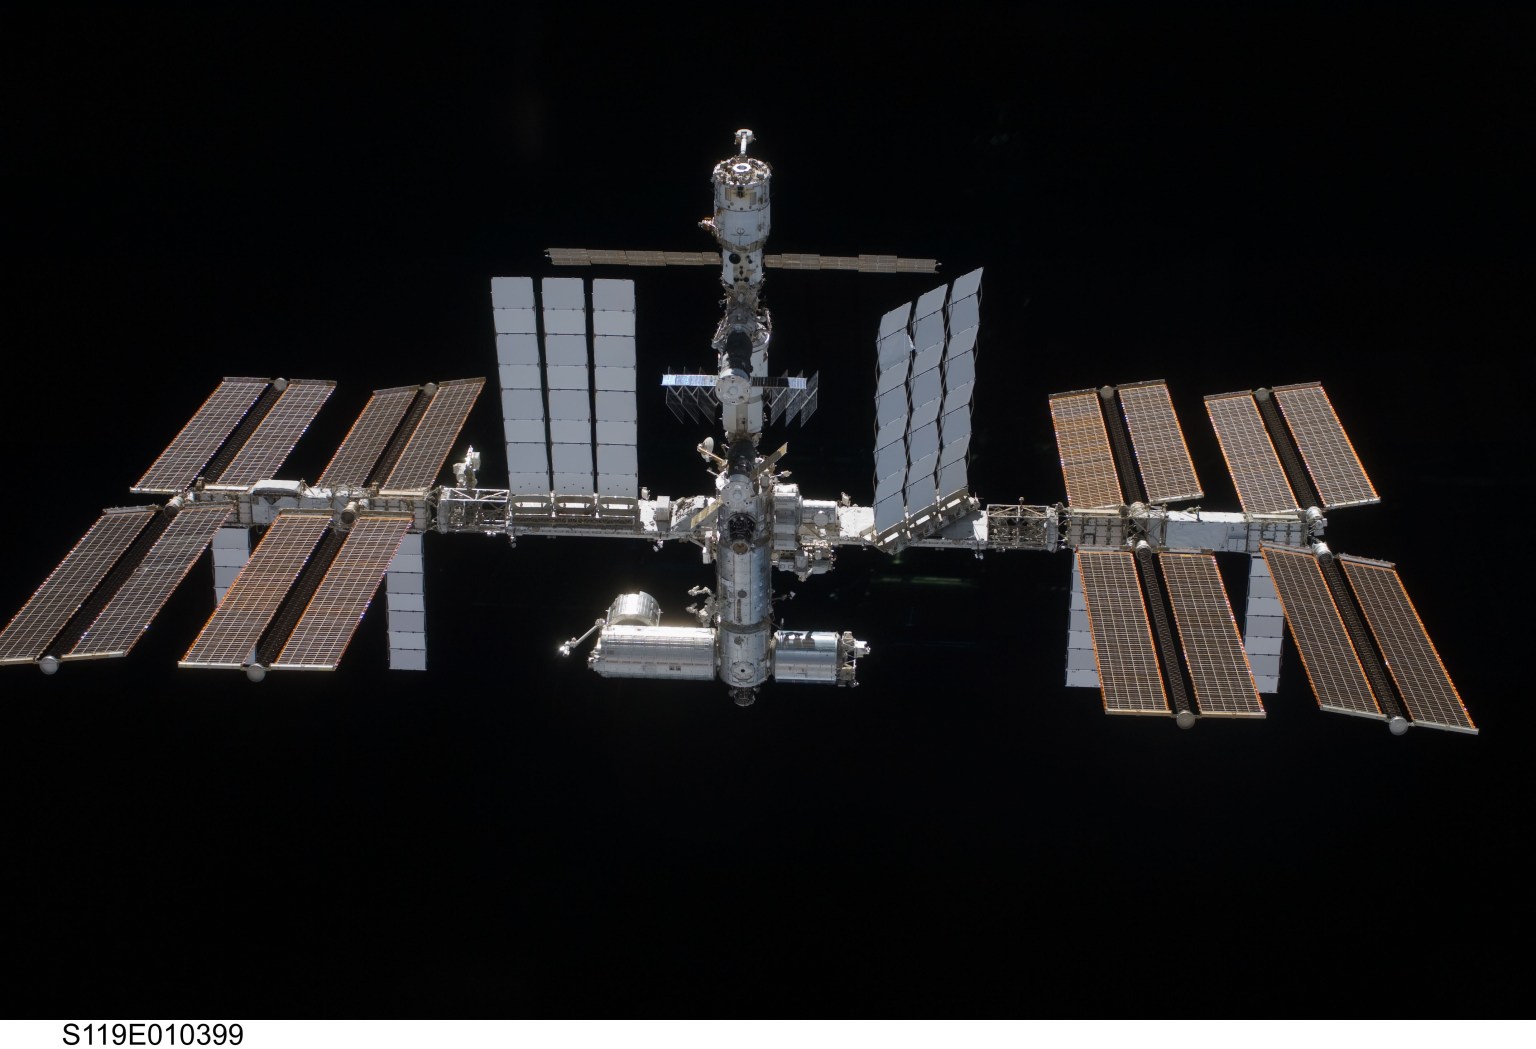 The installation of the S6 (Starboard) truss segment completes the assembly of the International Space Station's Integrated Truss Structure. The orbital outpost was pictured from space shuttle Discovery after it undocked on March 25, 2009.